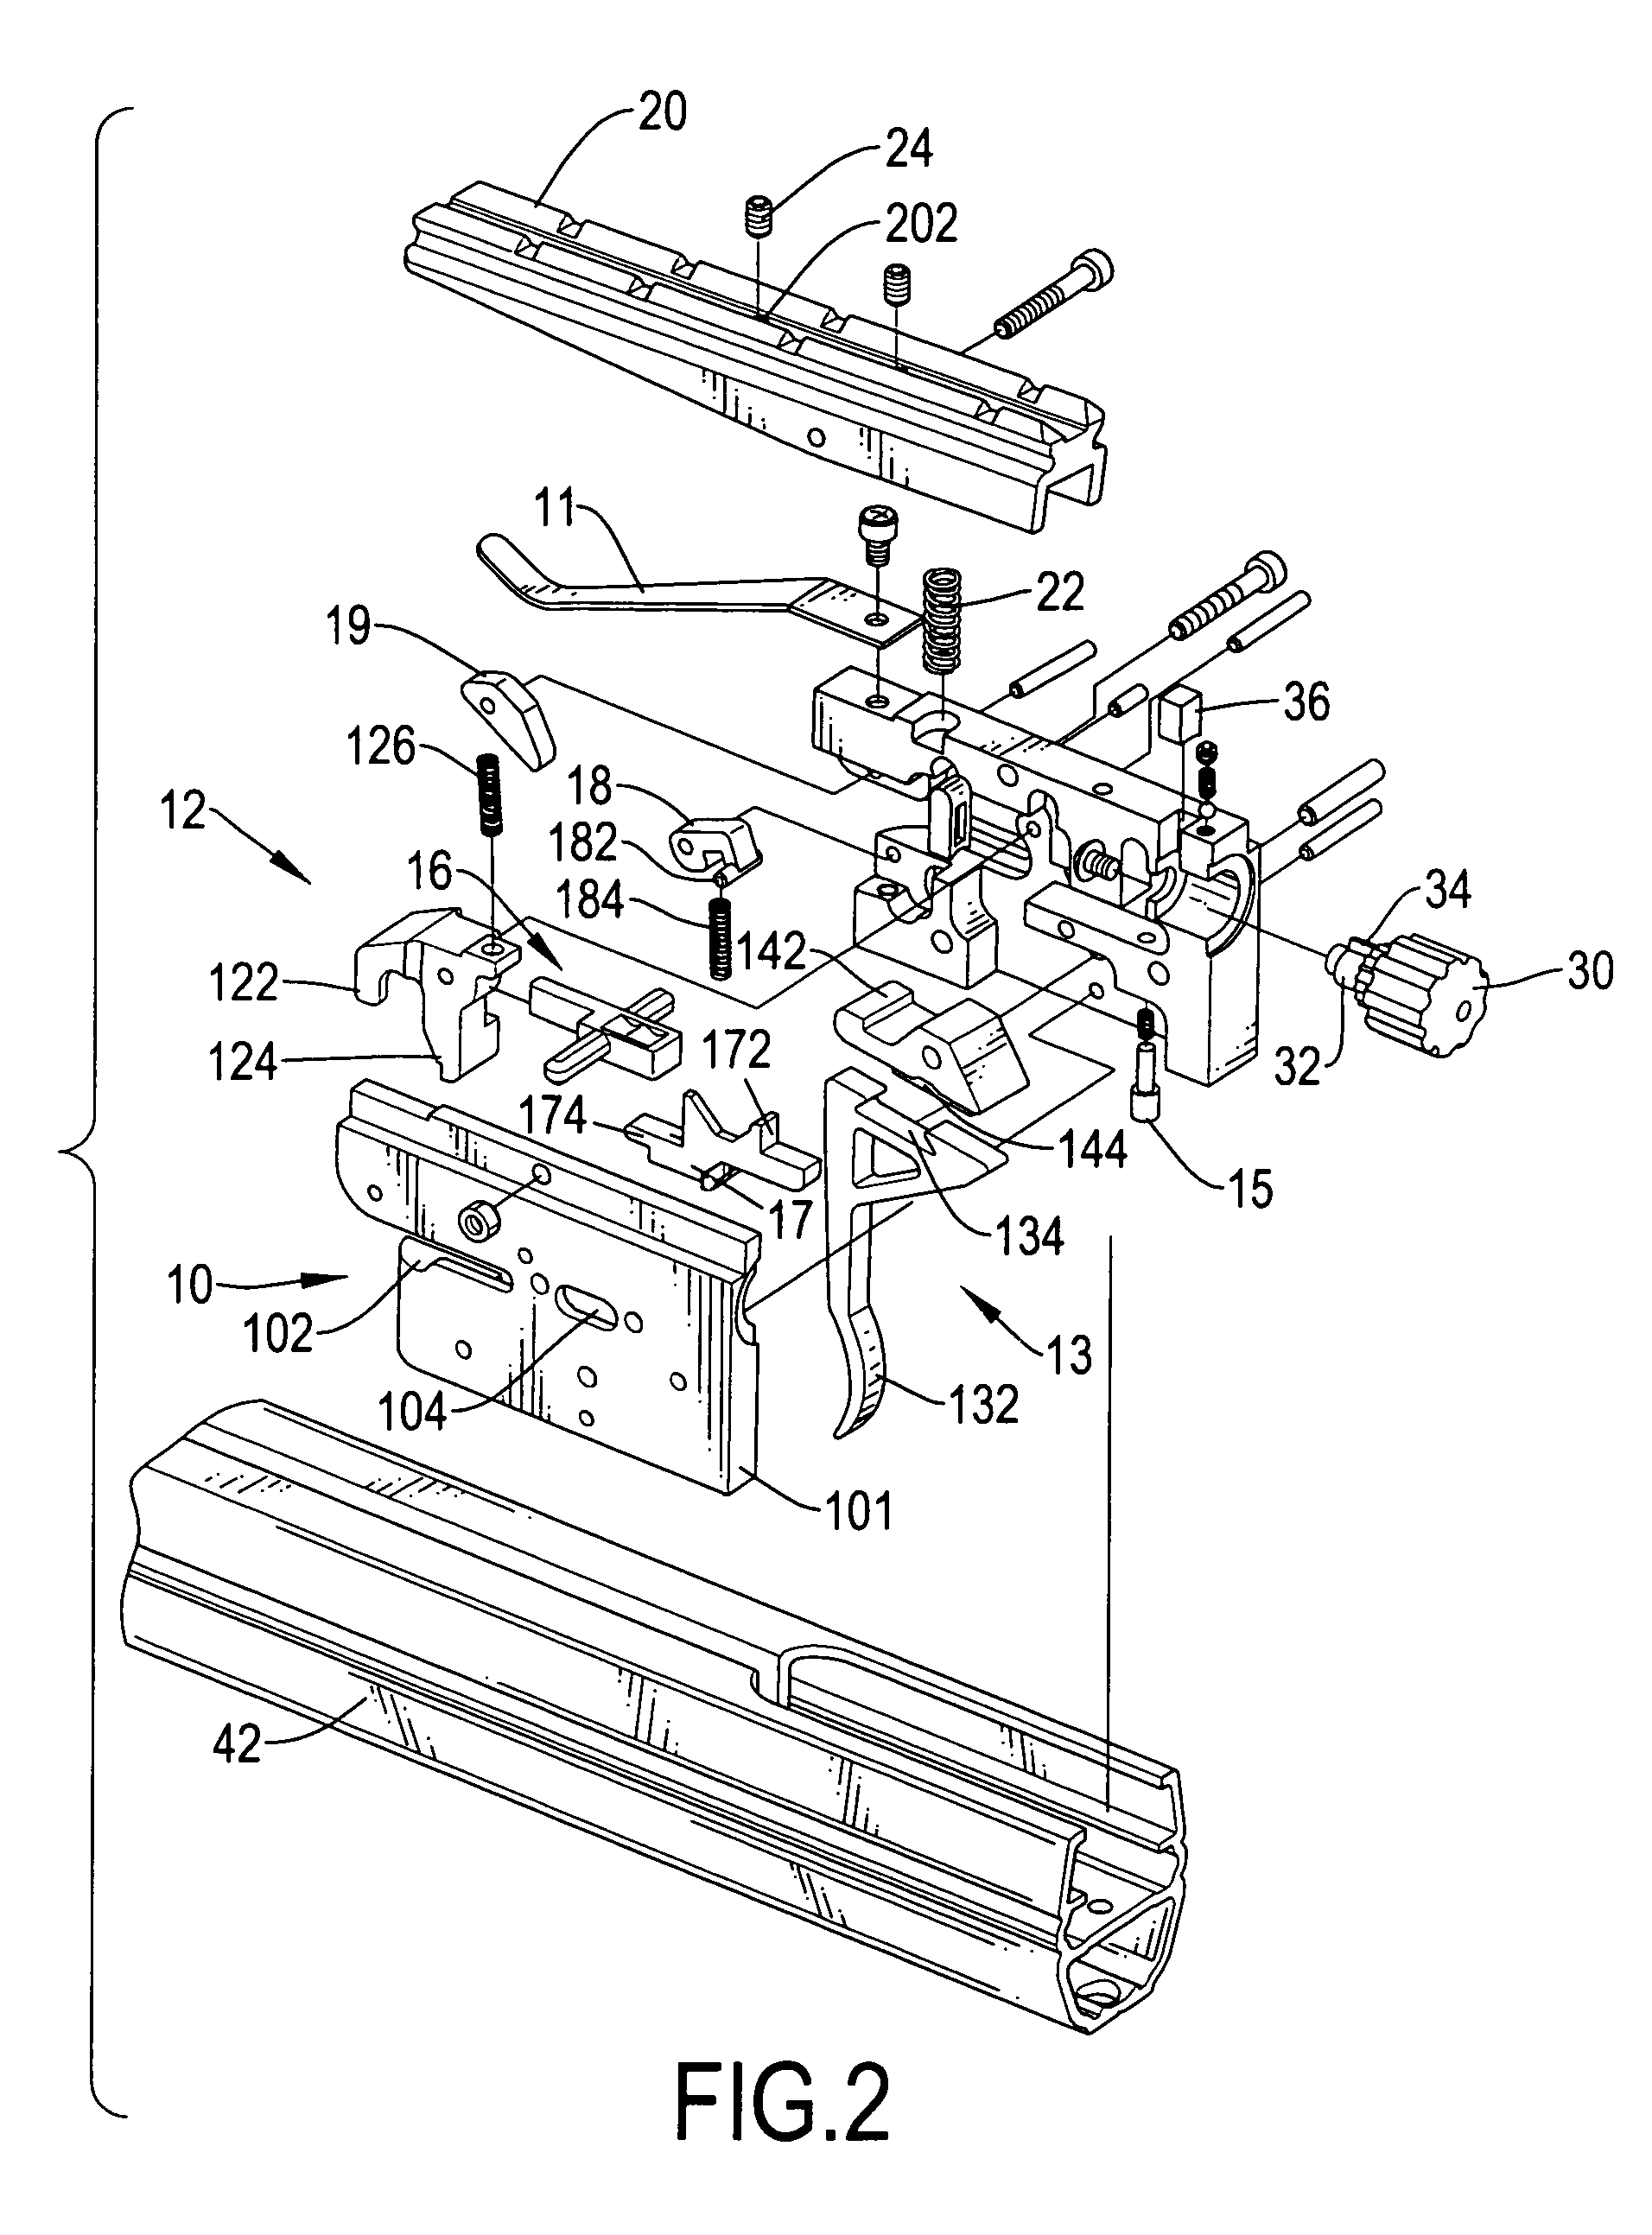 Trigger assembly with a safety device for a crossbow